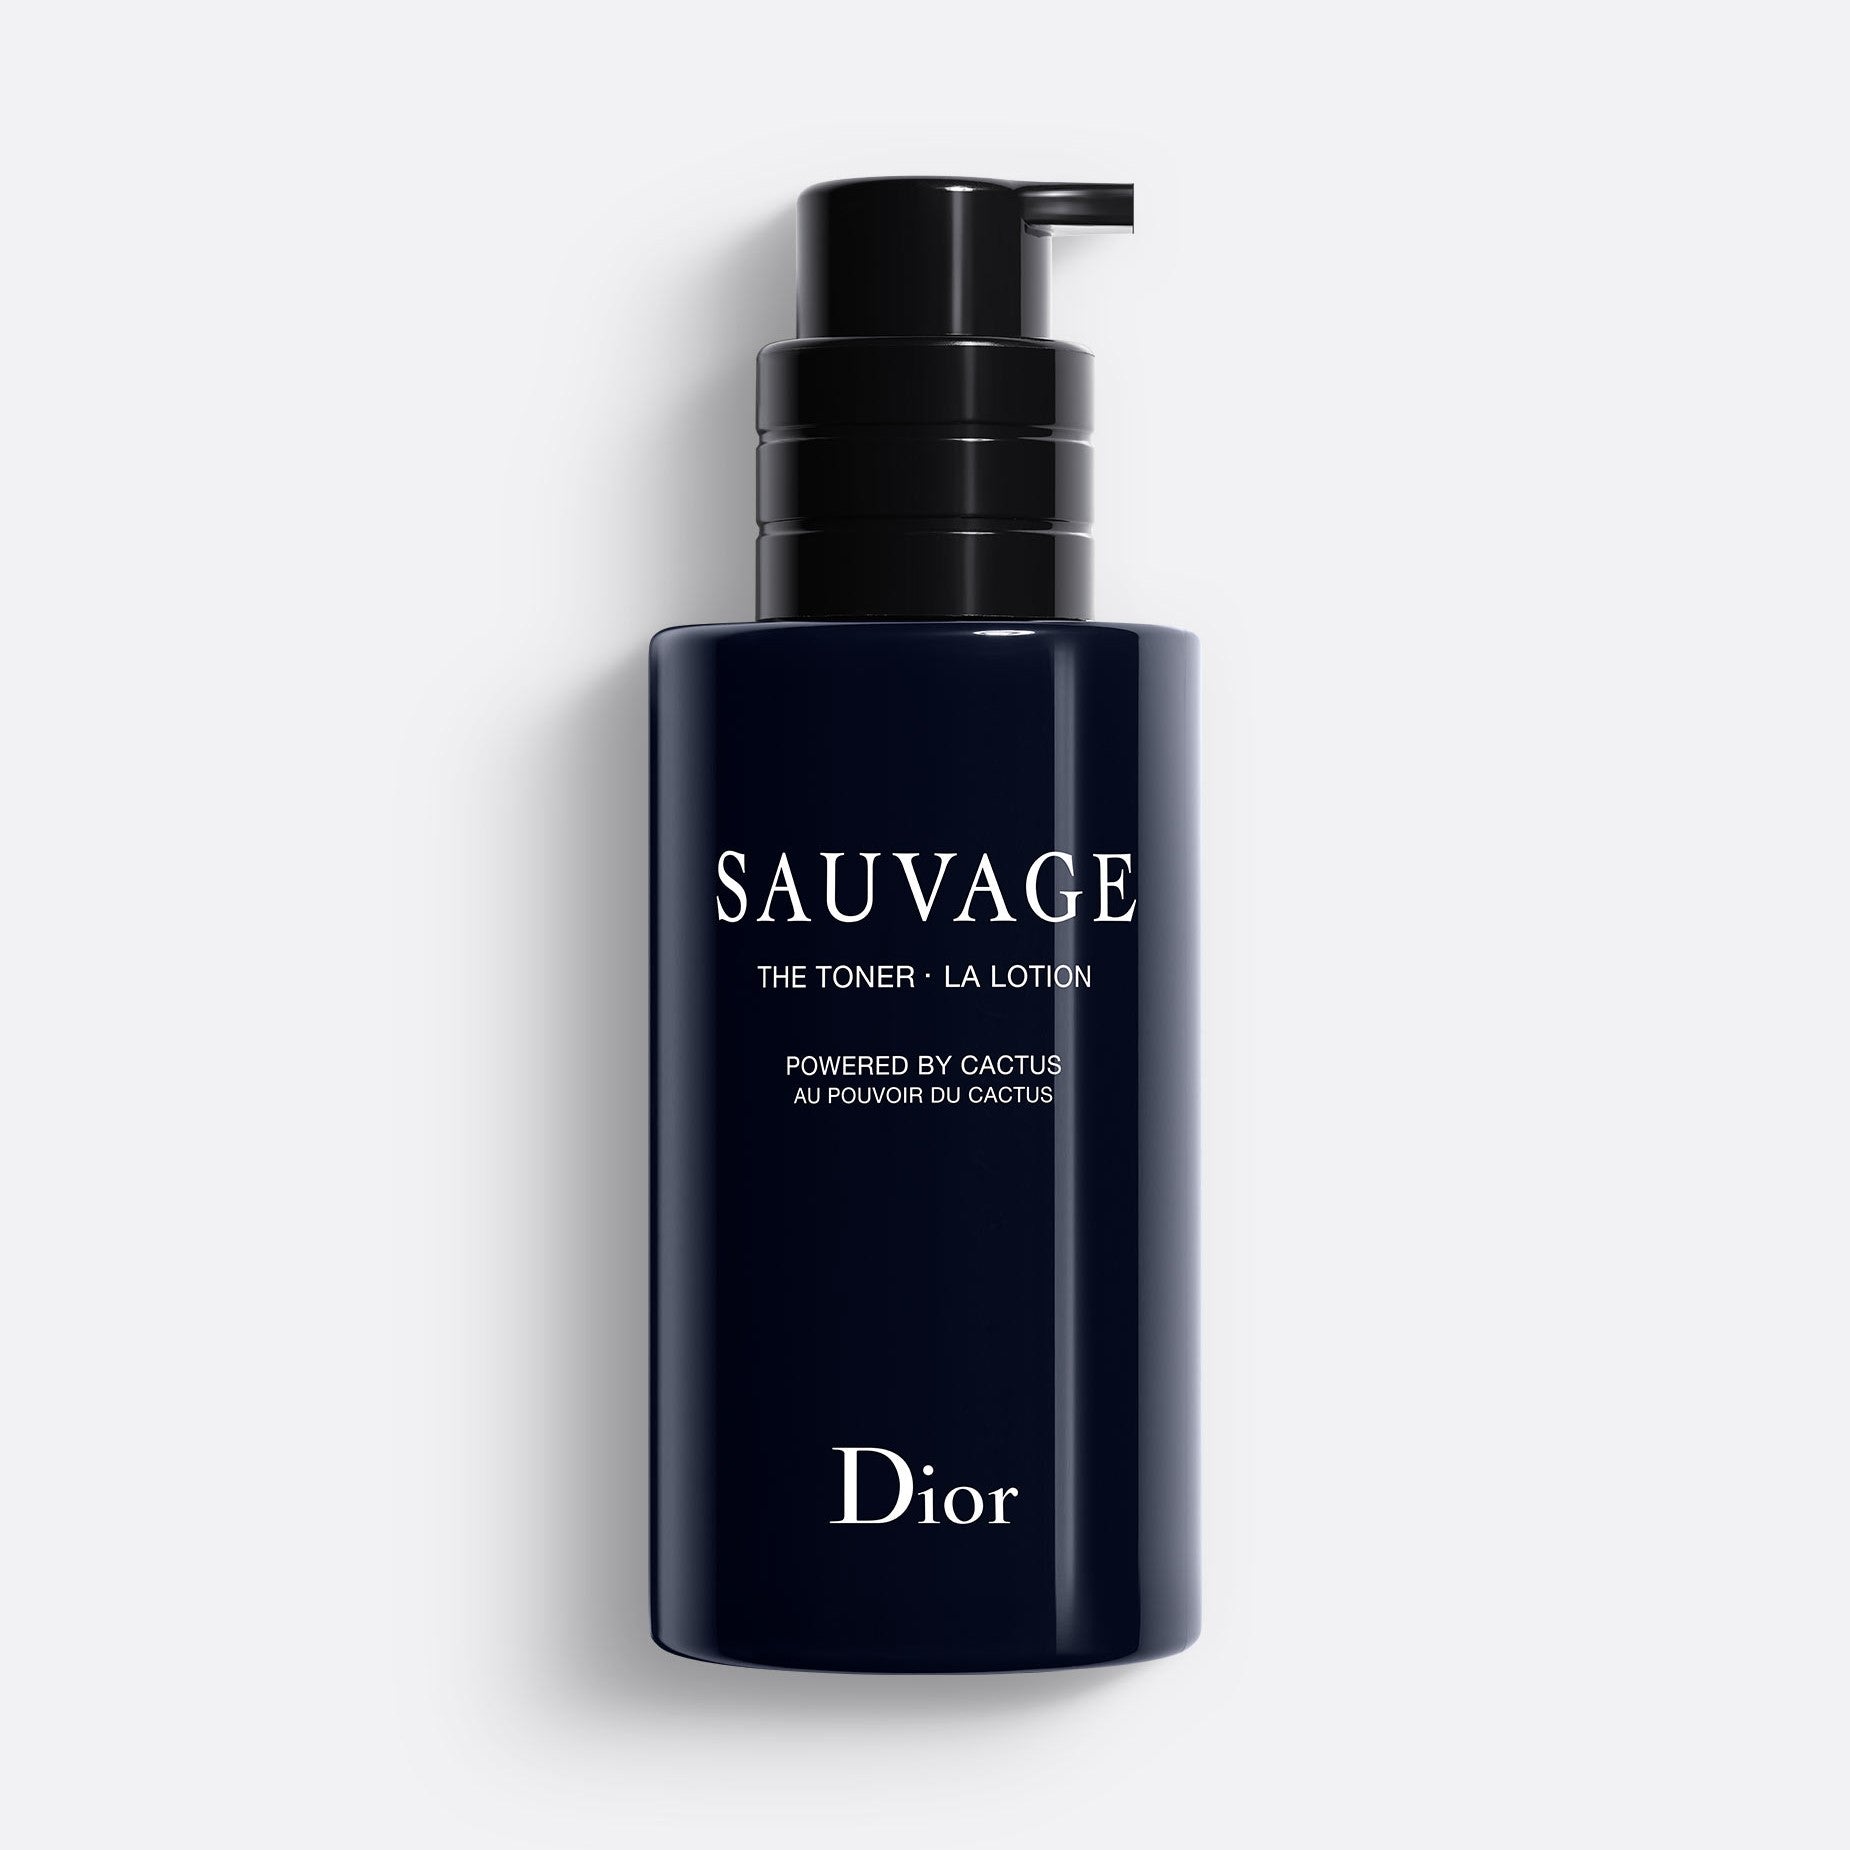 SAUVAGE THE TONER | Face Toner Lotion with Cactus Extract - Energizing and Soothing